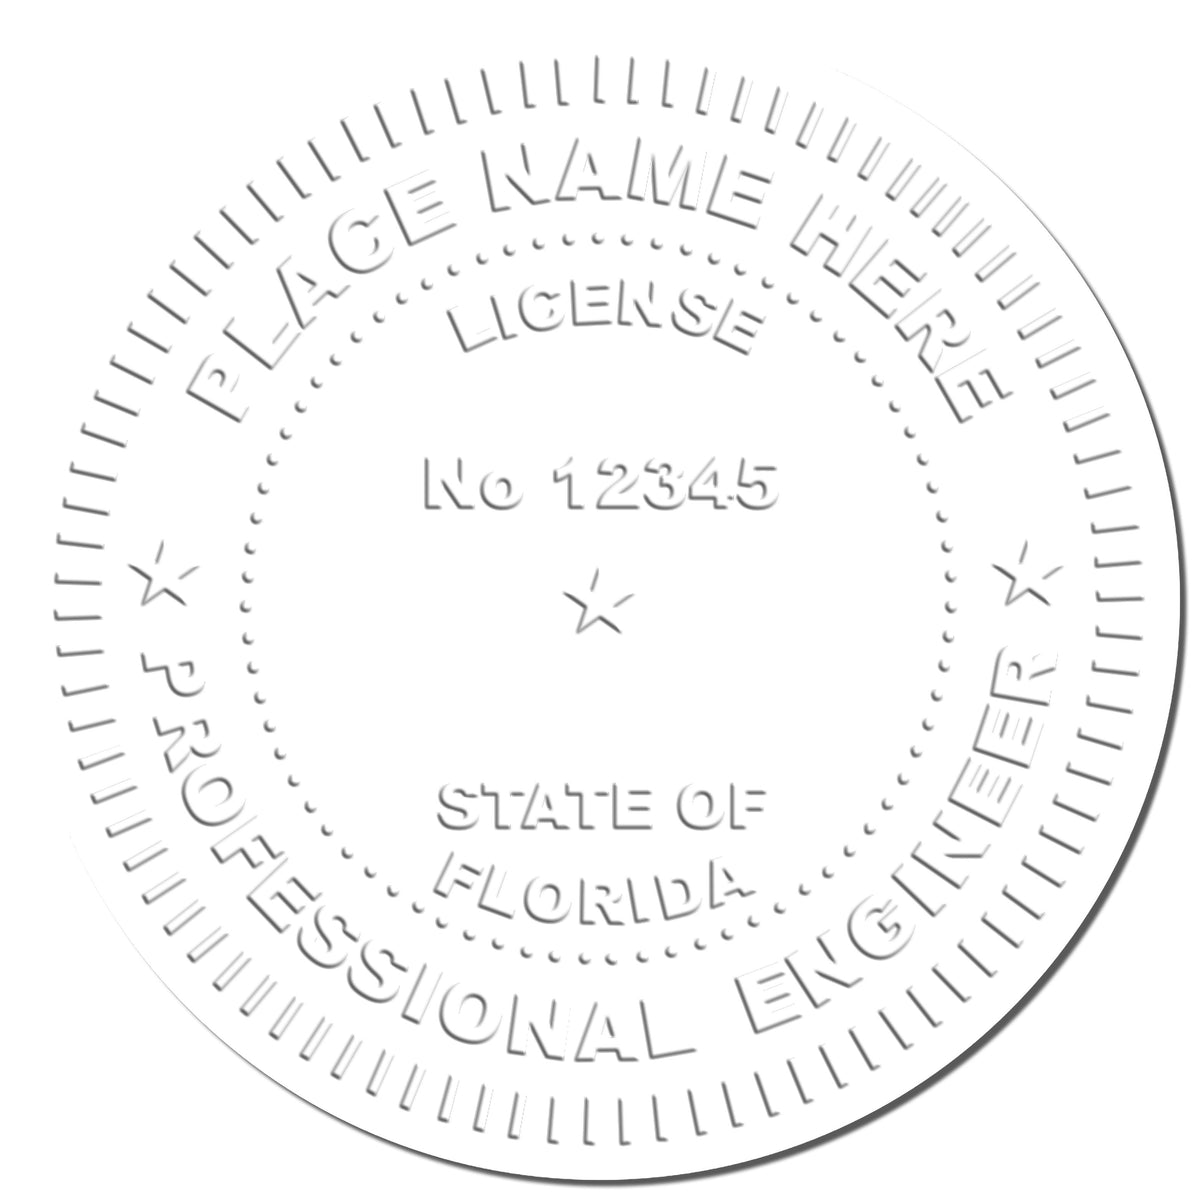 This paper is stamped with a sample imprint of the State of Florida Extended Long Reach Engineer Seal, signifying its quality and reliability.